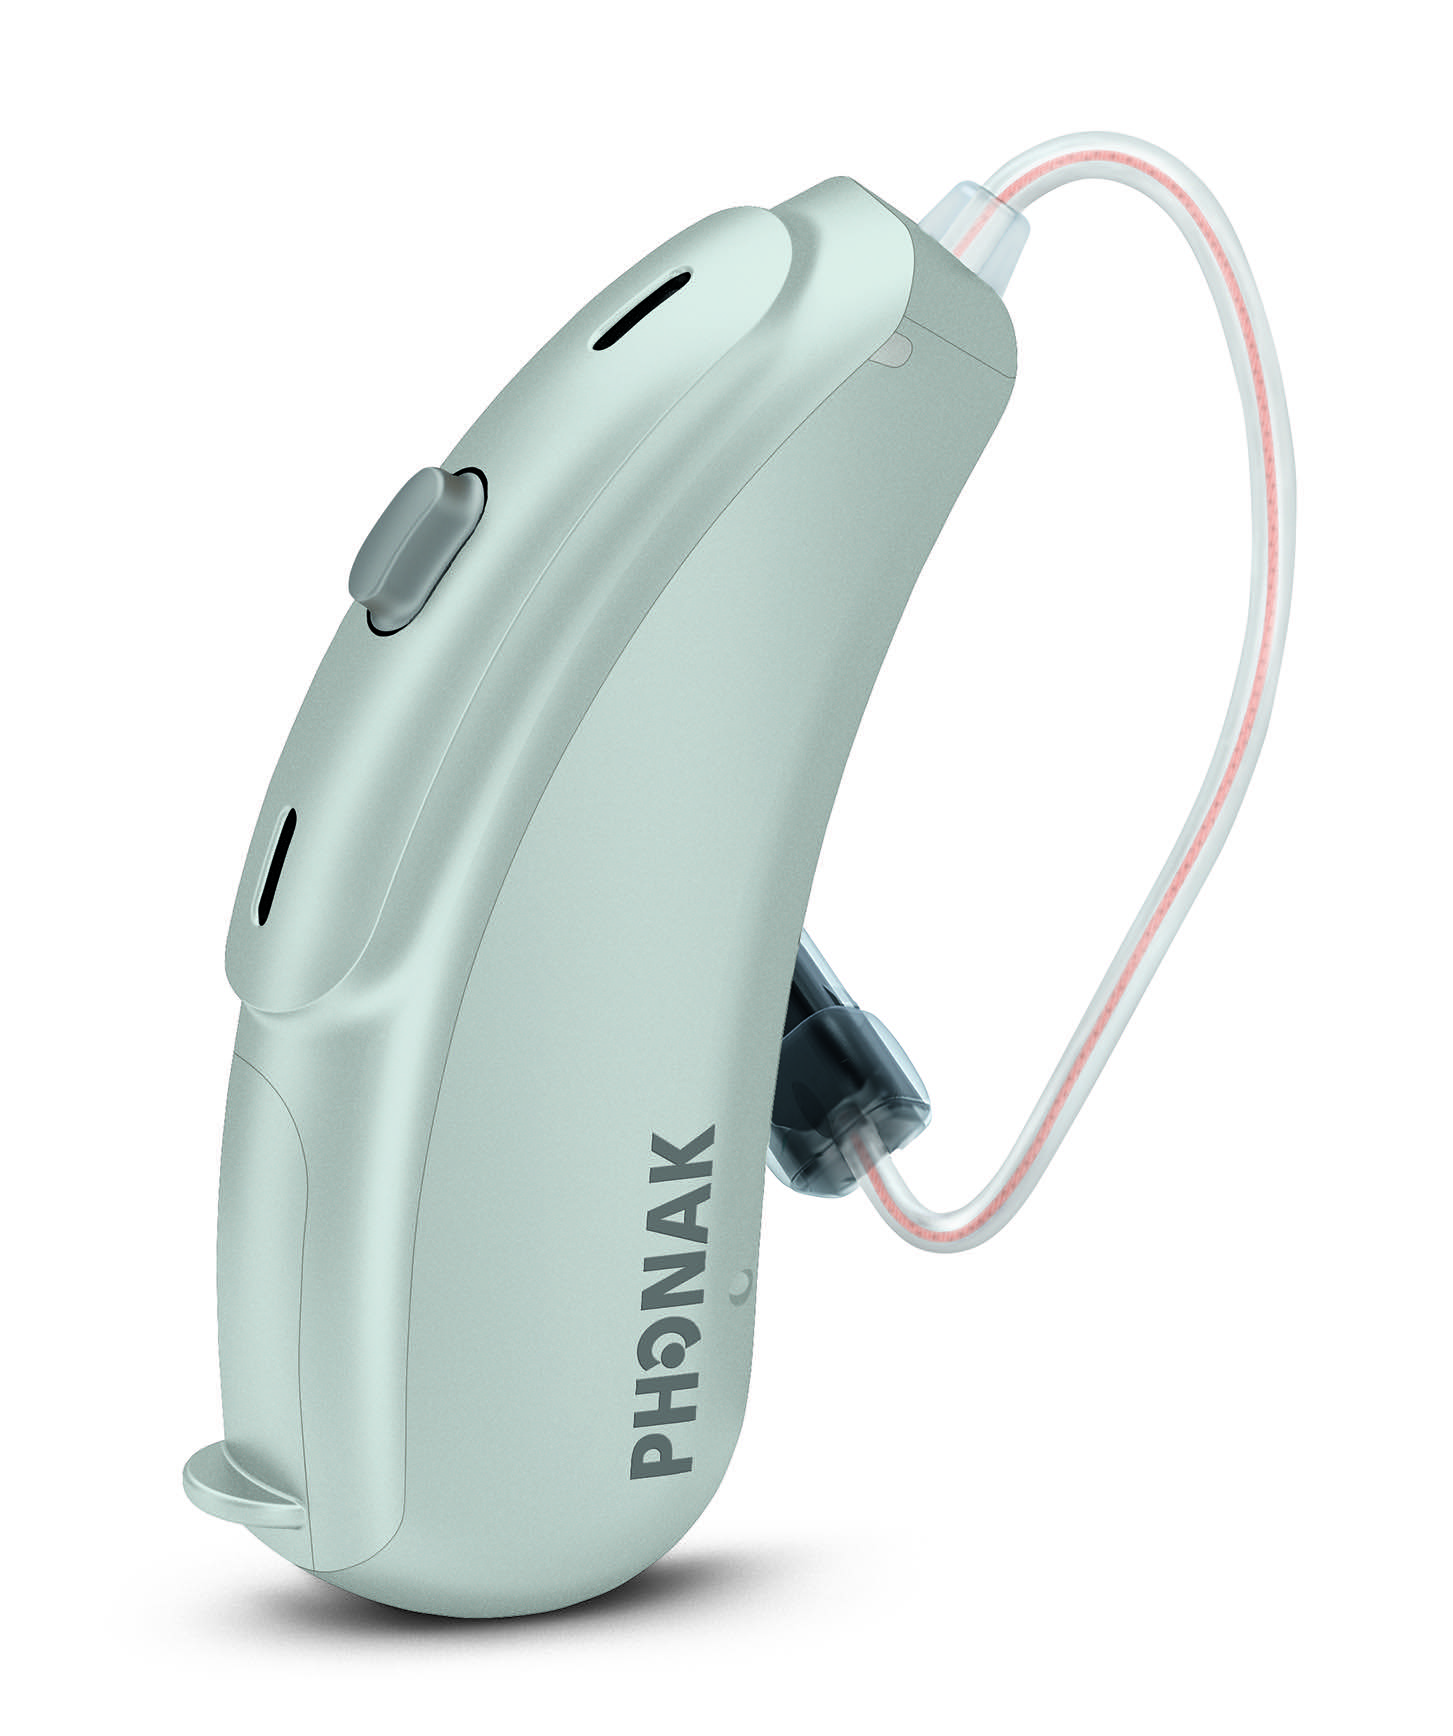 Phonak hearing aid portfolio now available on the NHS